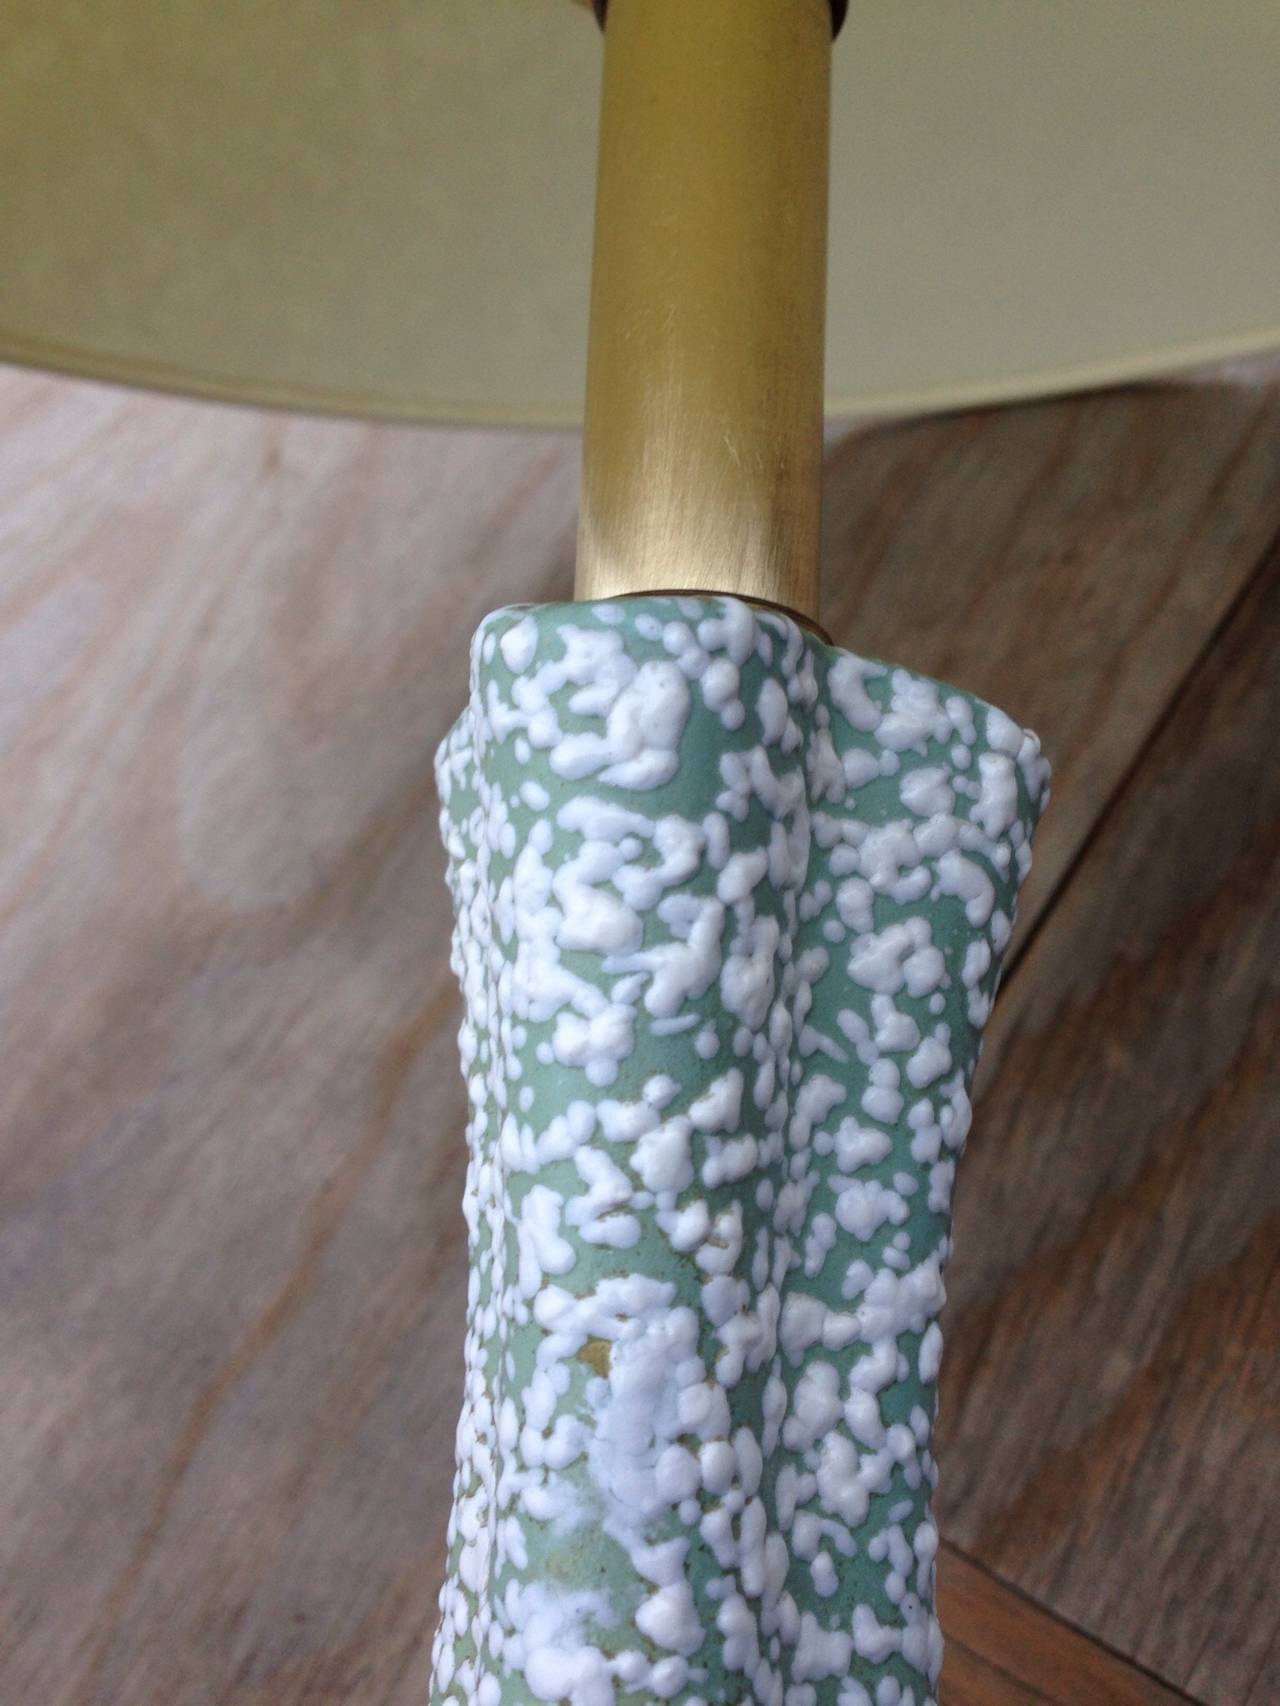 Pair of Mid-Century Modern table night lamps, light celadon green and white speckles, with brass accents and walnut base.